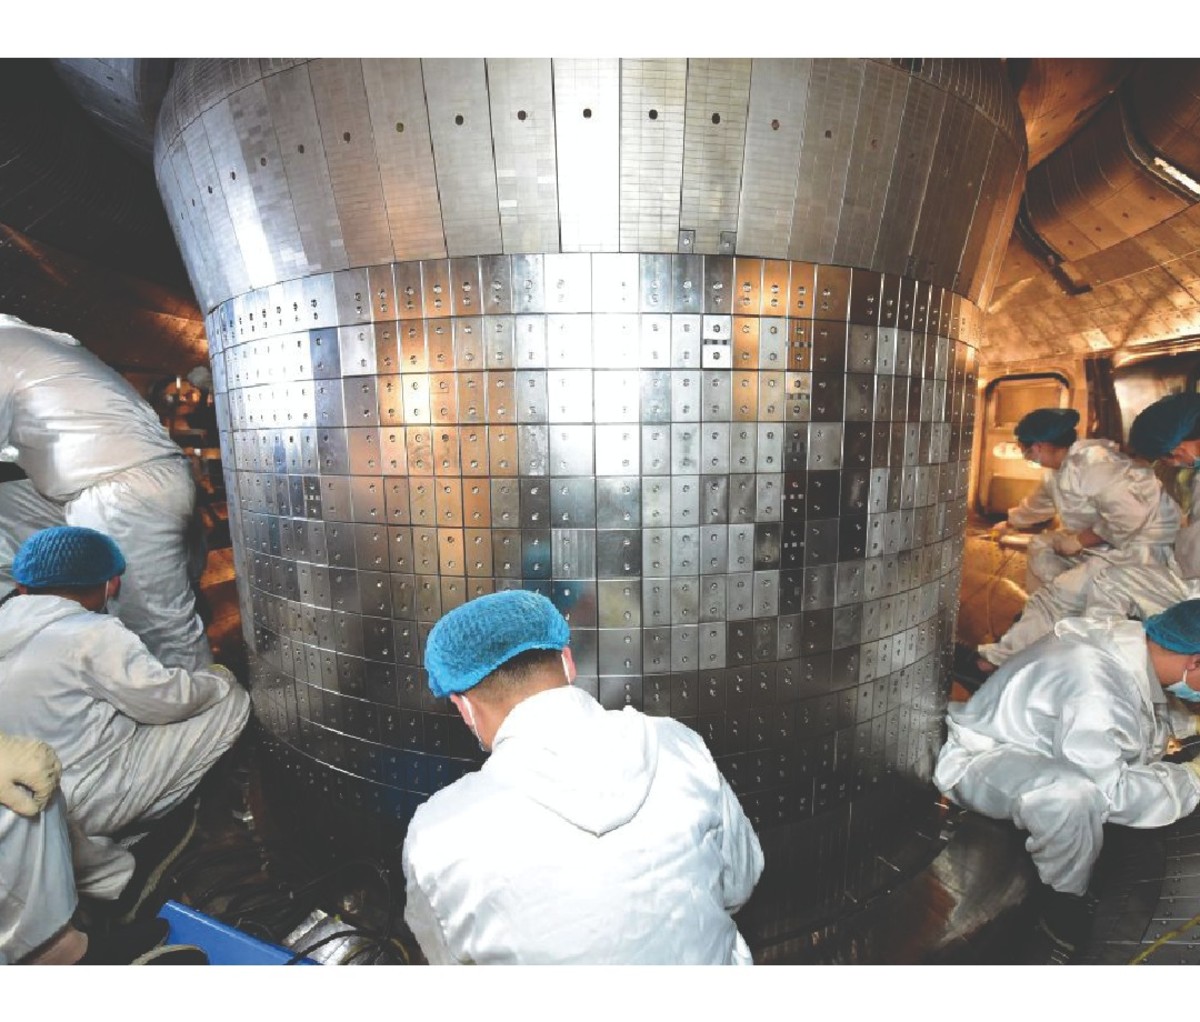 Scientists working on nuclear reactor